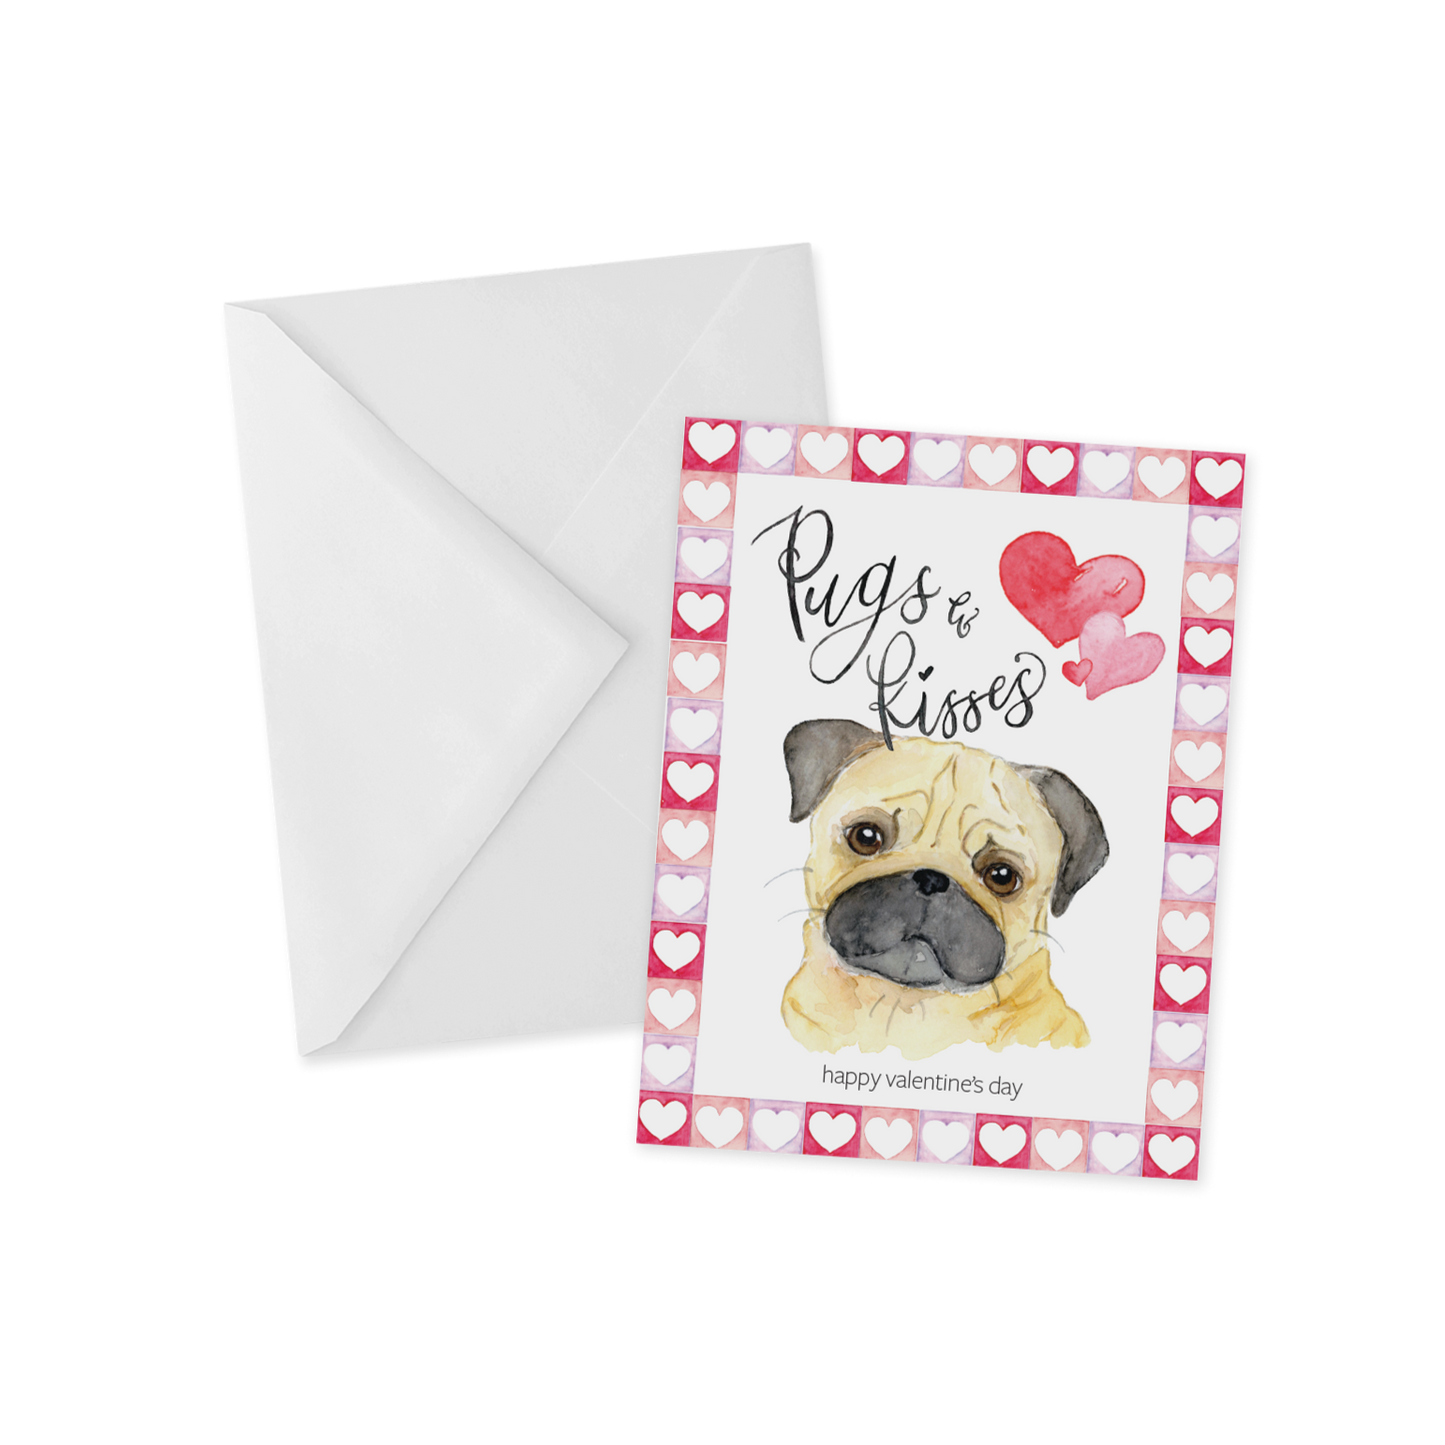 Pugs n’ Kisses Valentine's Day Greeting Card